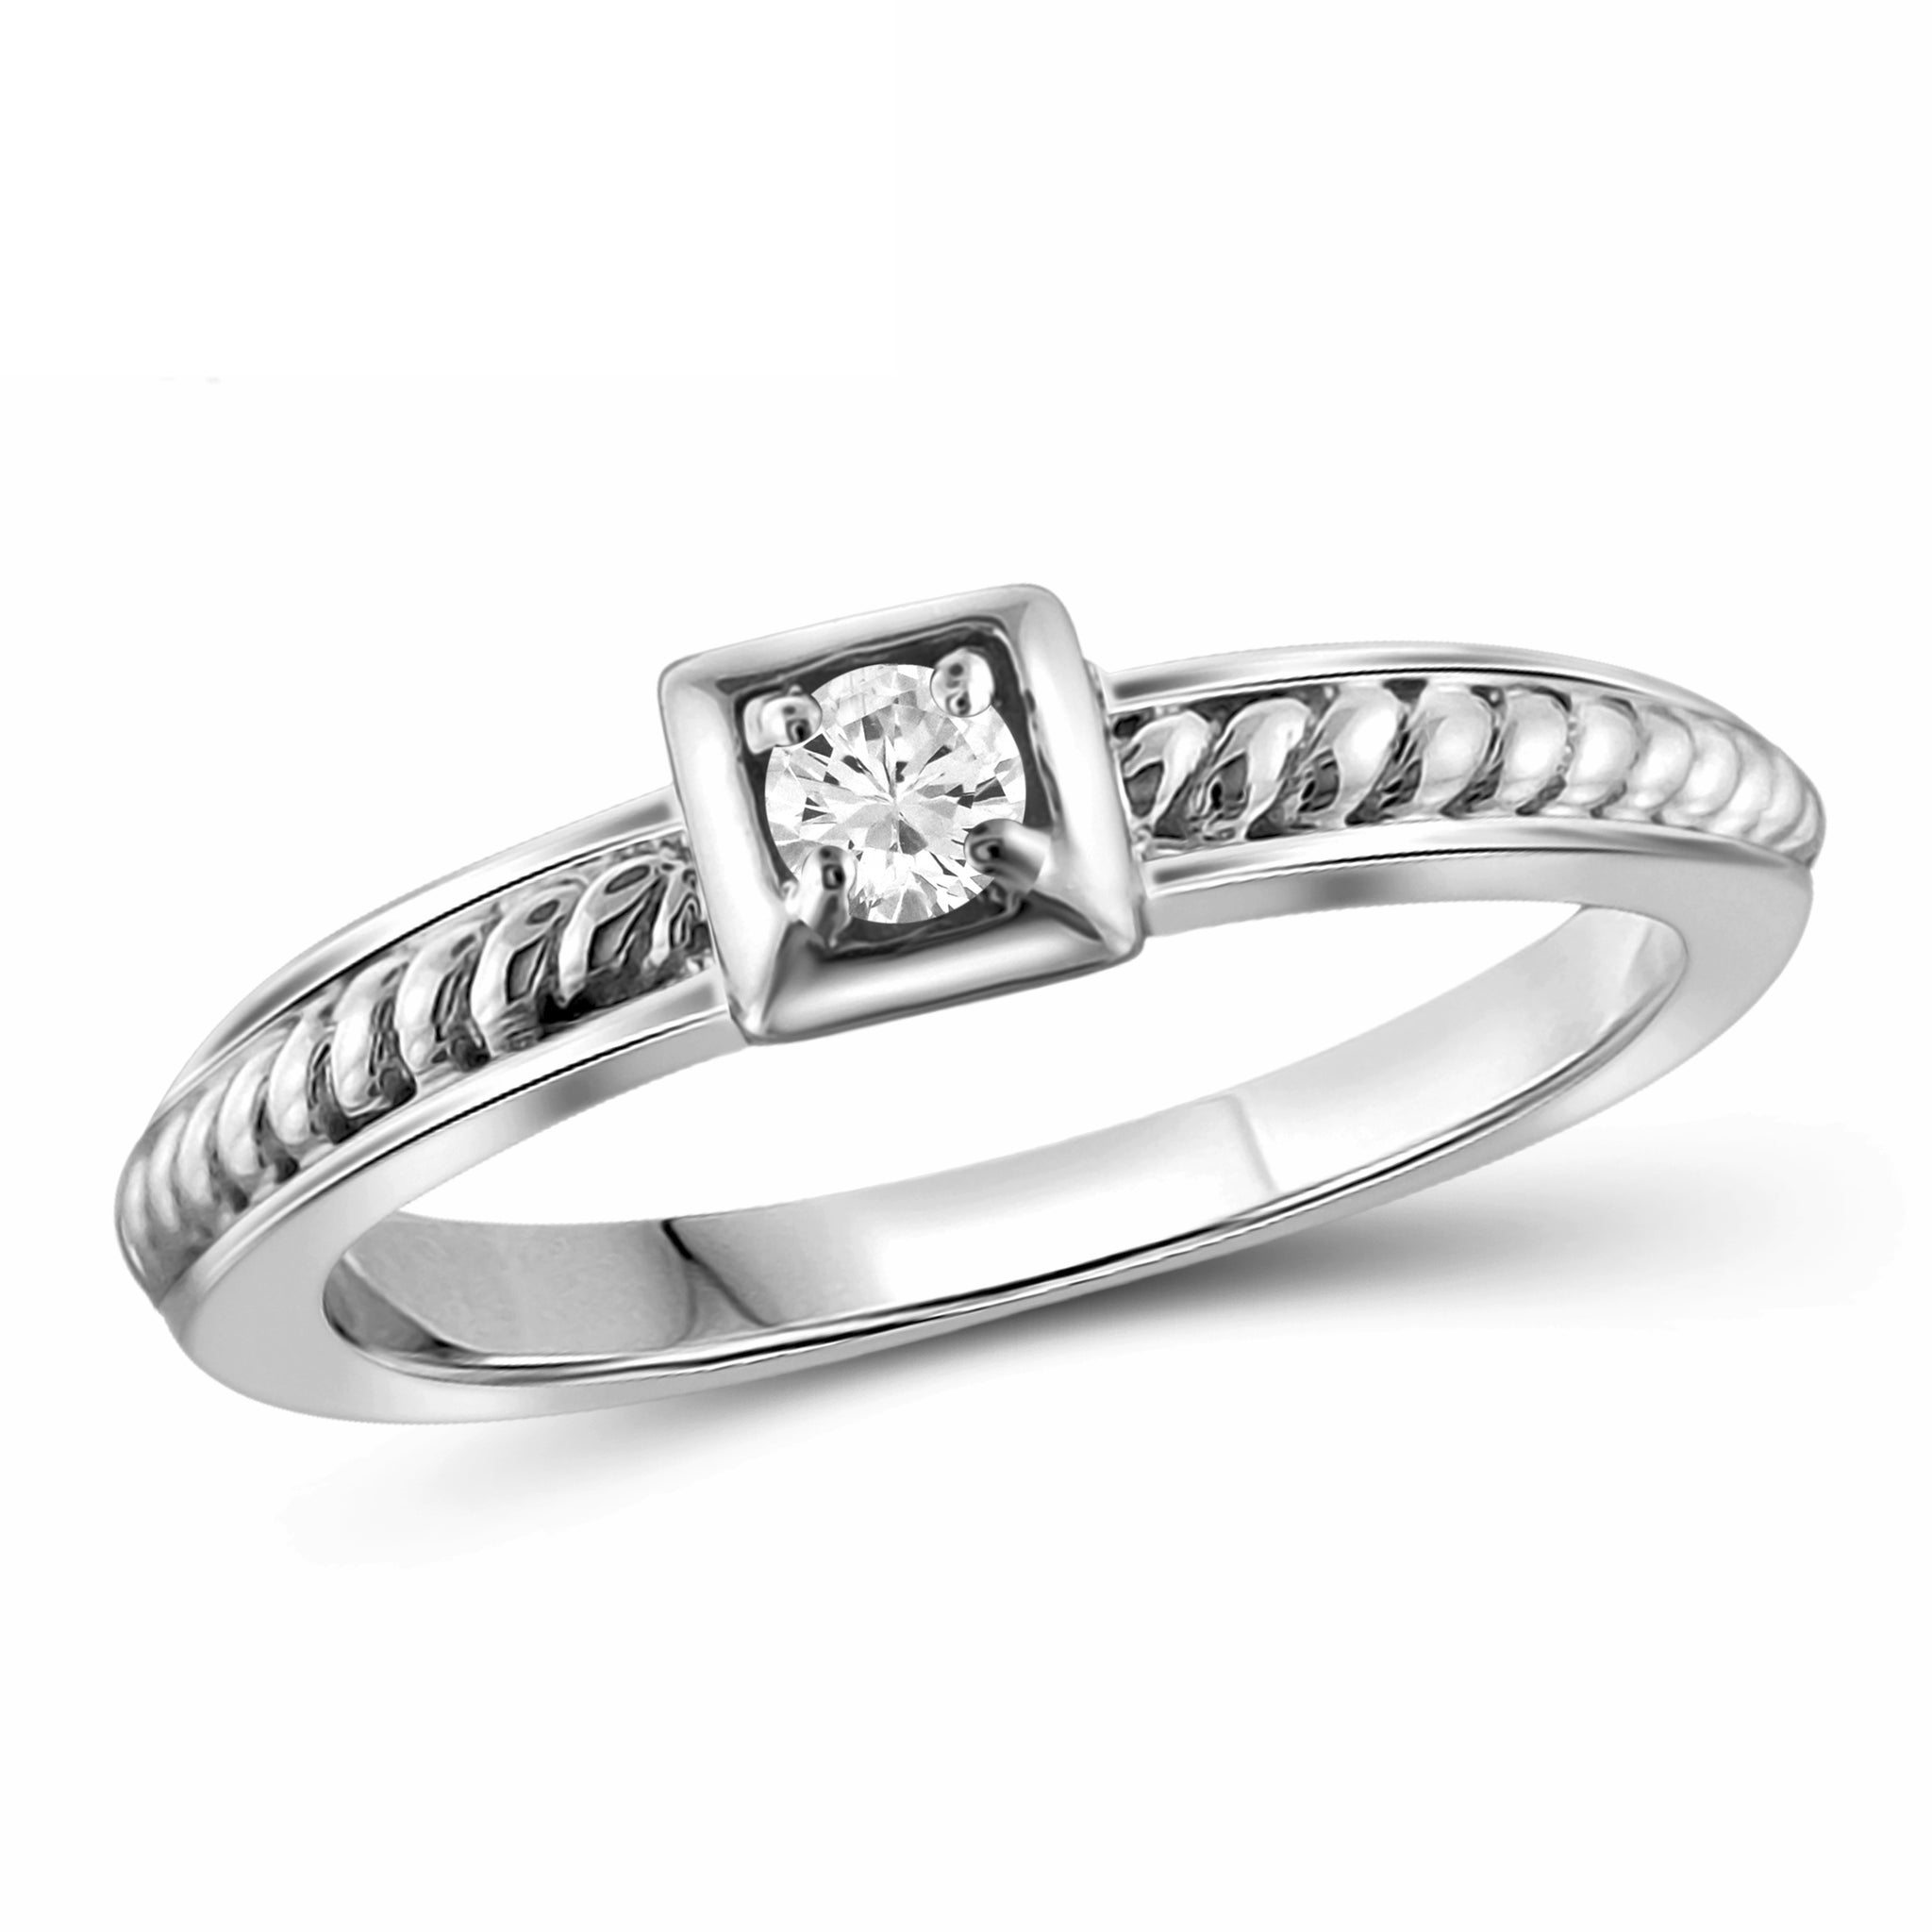 JewelonFire 1/10 Carat T.W. White Diamond Sterling Silver Stackable Ring - Assorted Colors